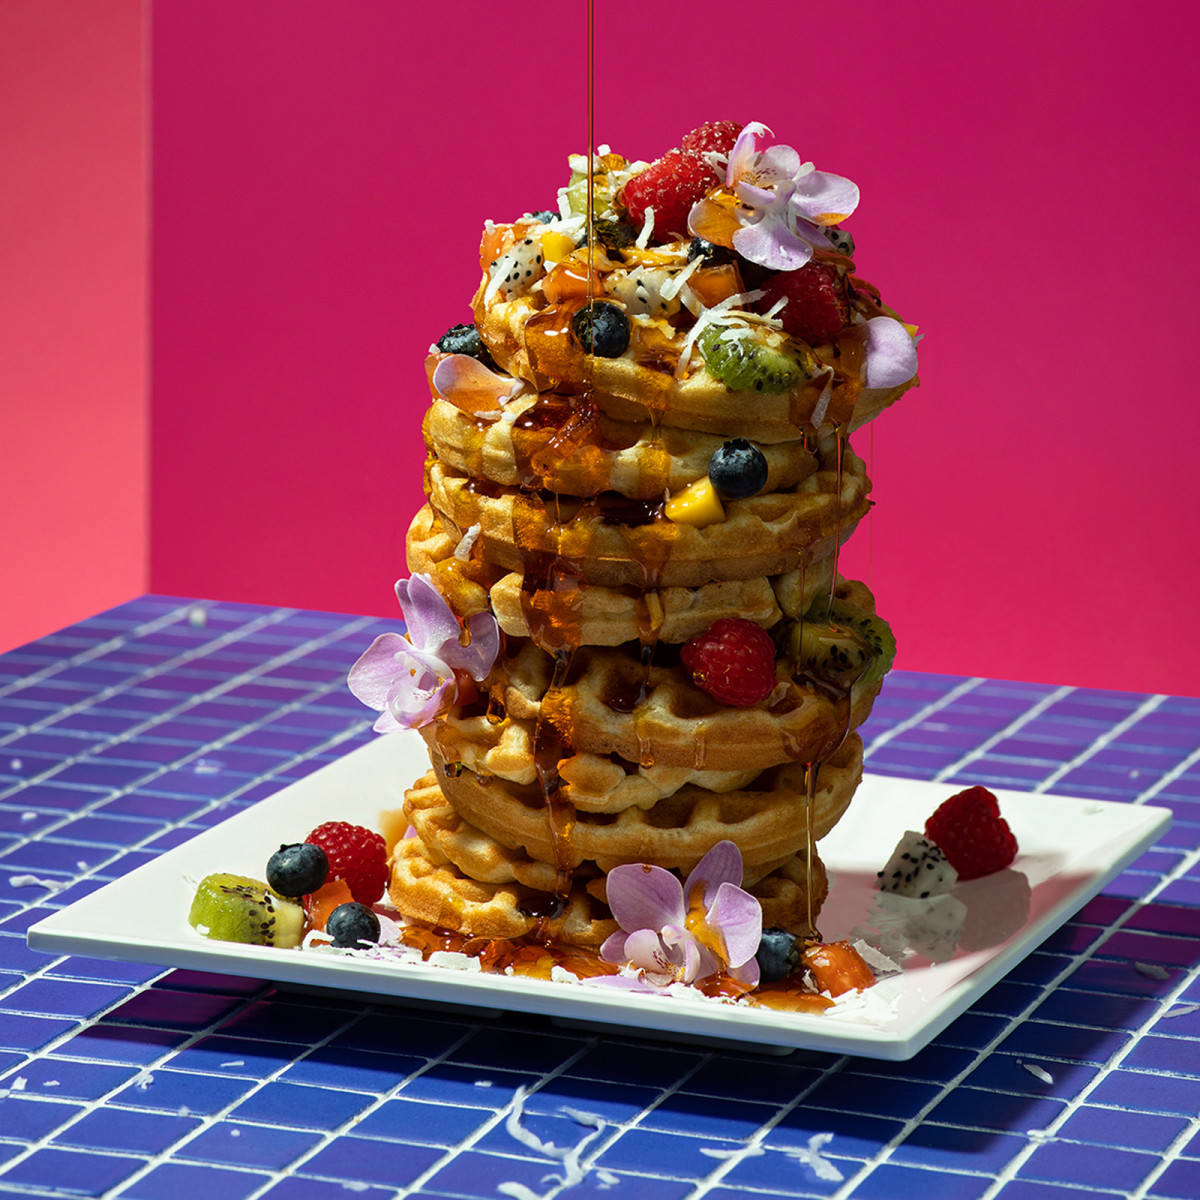 commercial food photograph of waffle stack created for Adobe all apps with pink and purple background